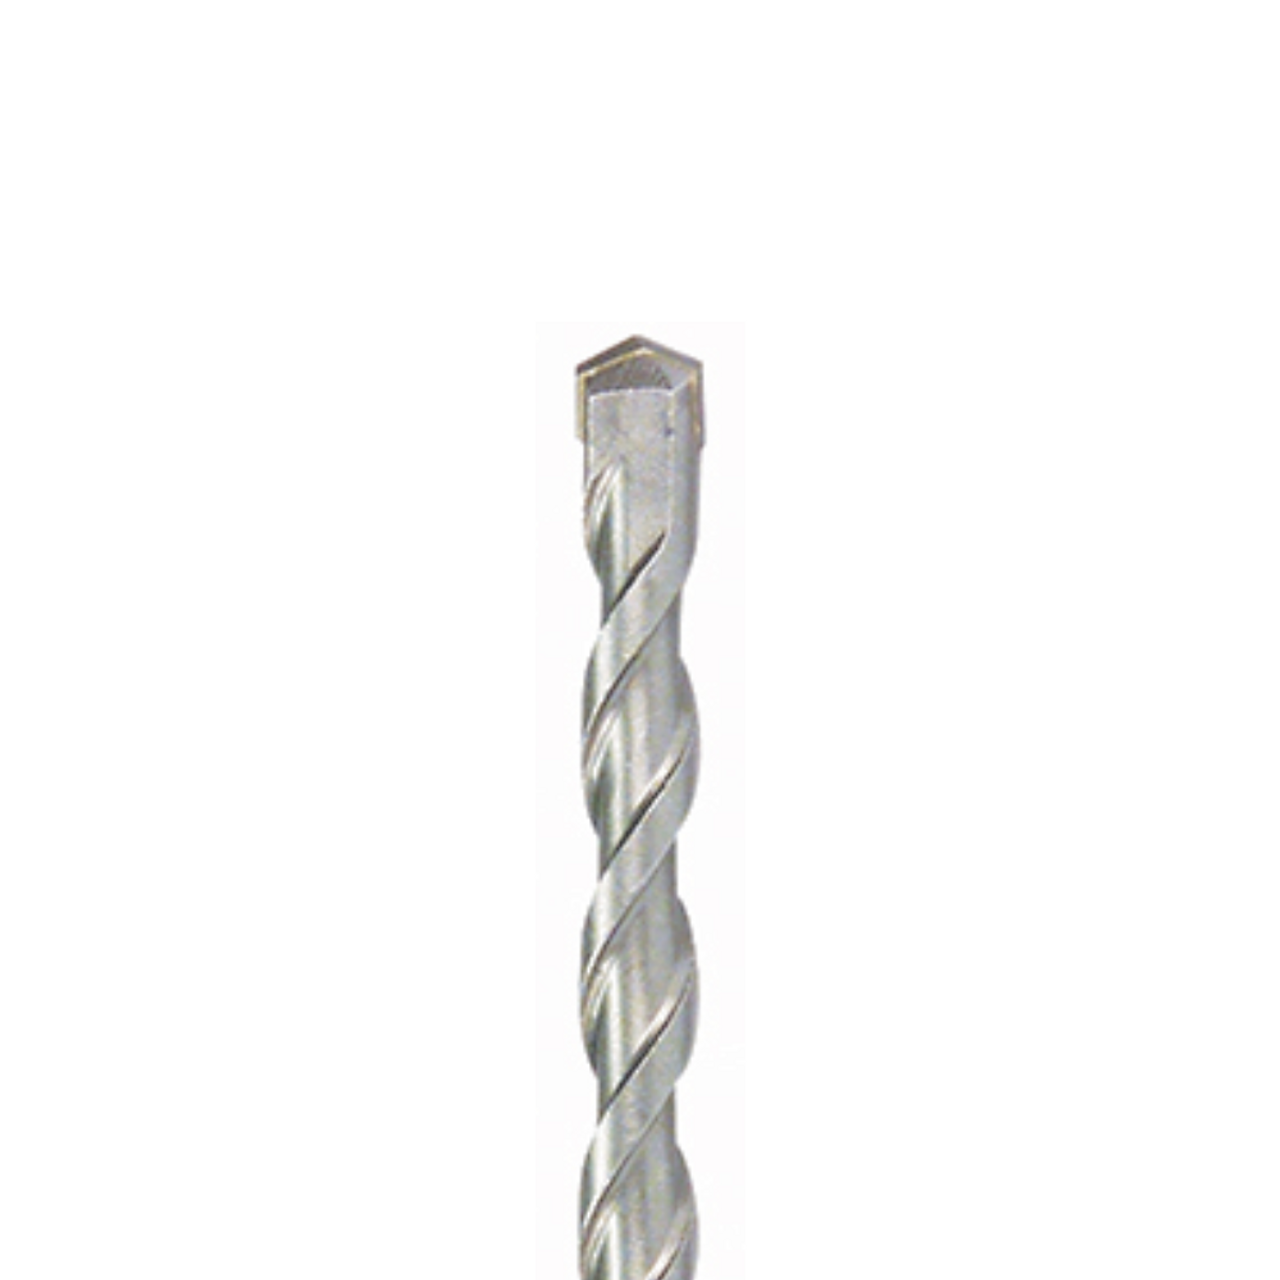 BOHRCRAFT Drill Bits | 2590 ECO Hammer Drill Bits for 250mm Depth for SDS-Plus